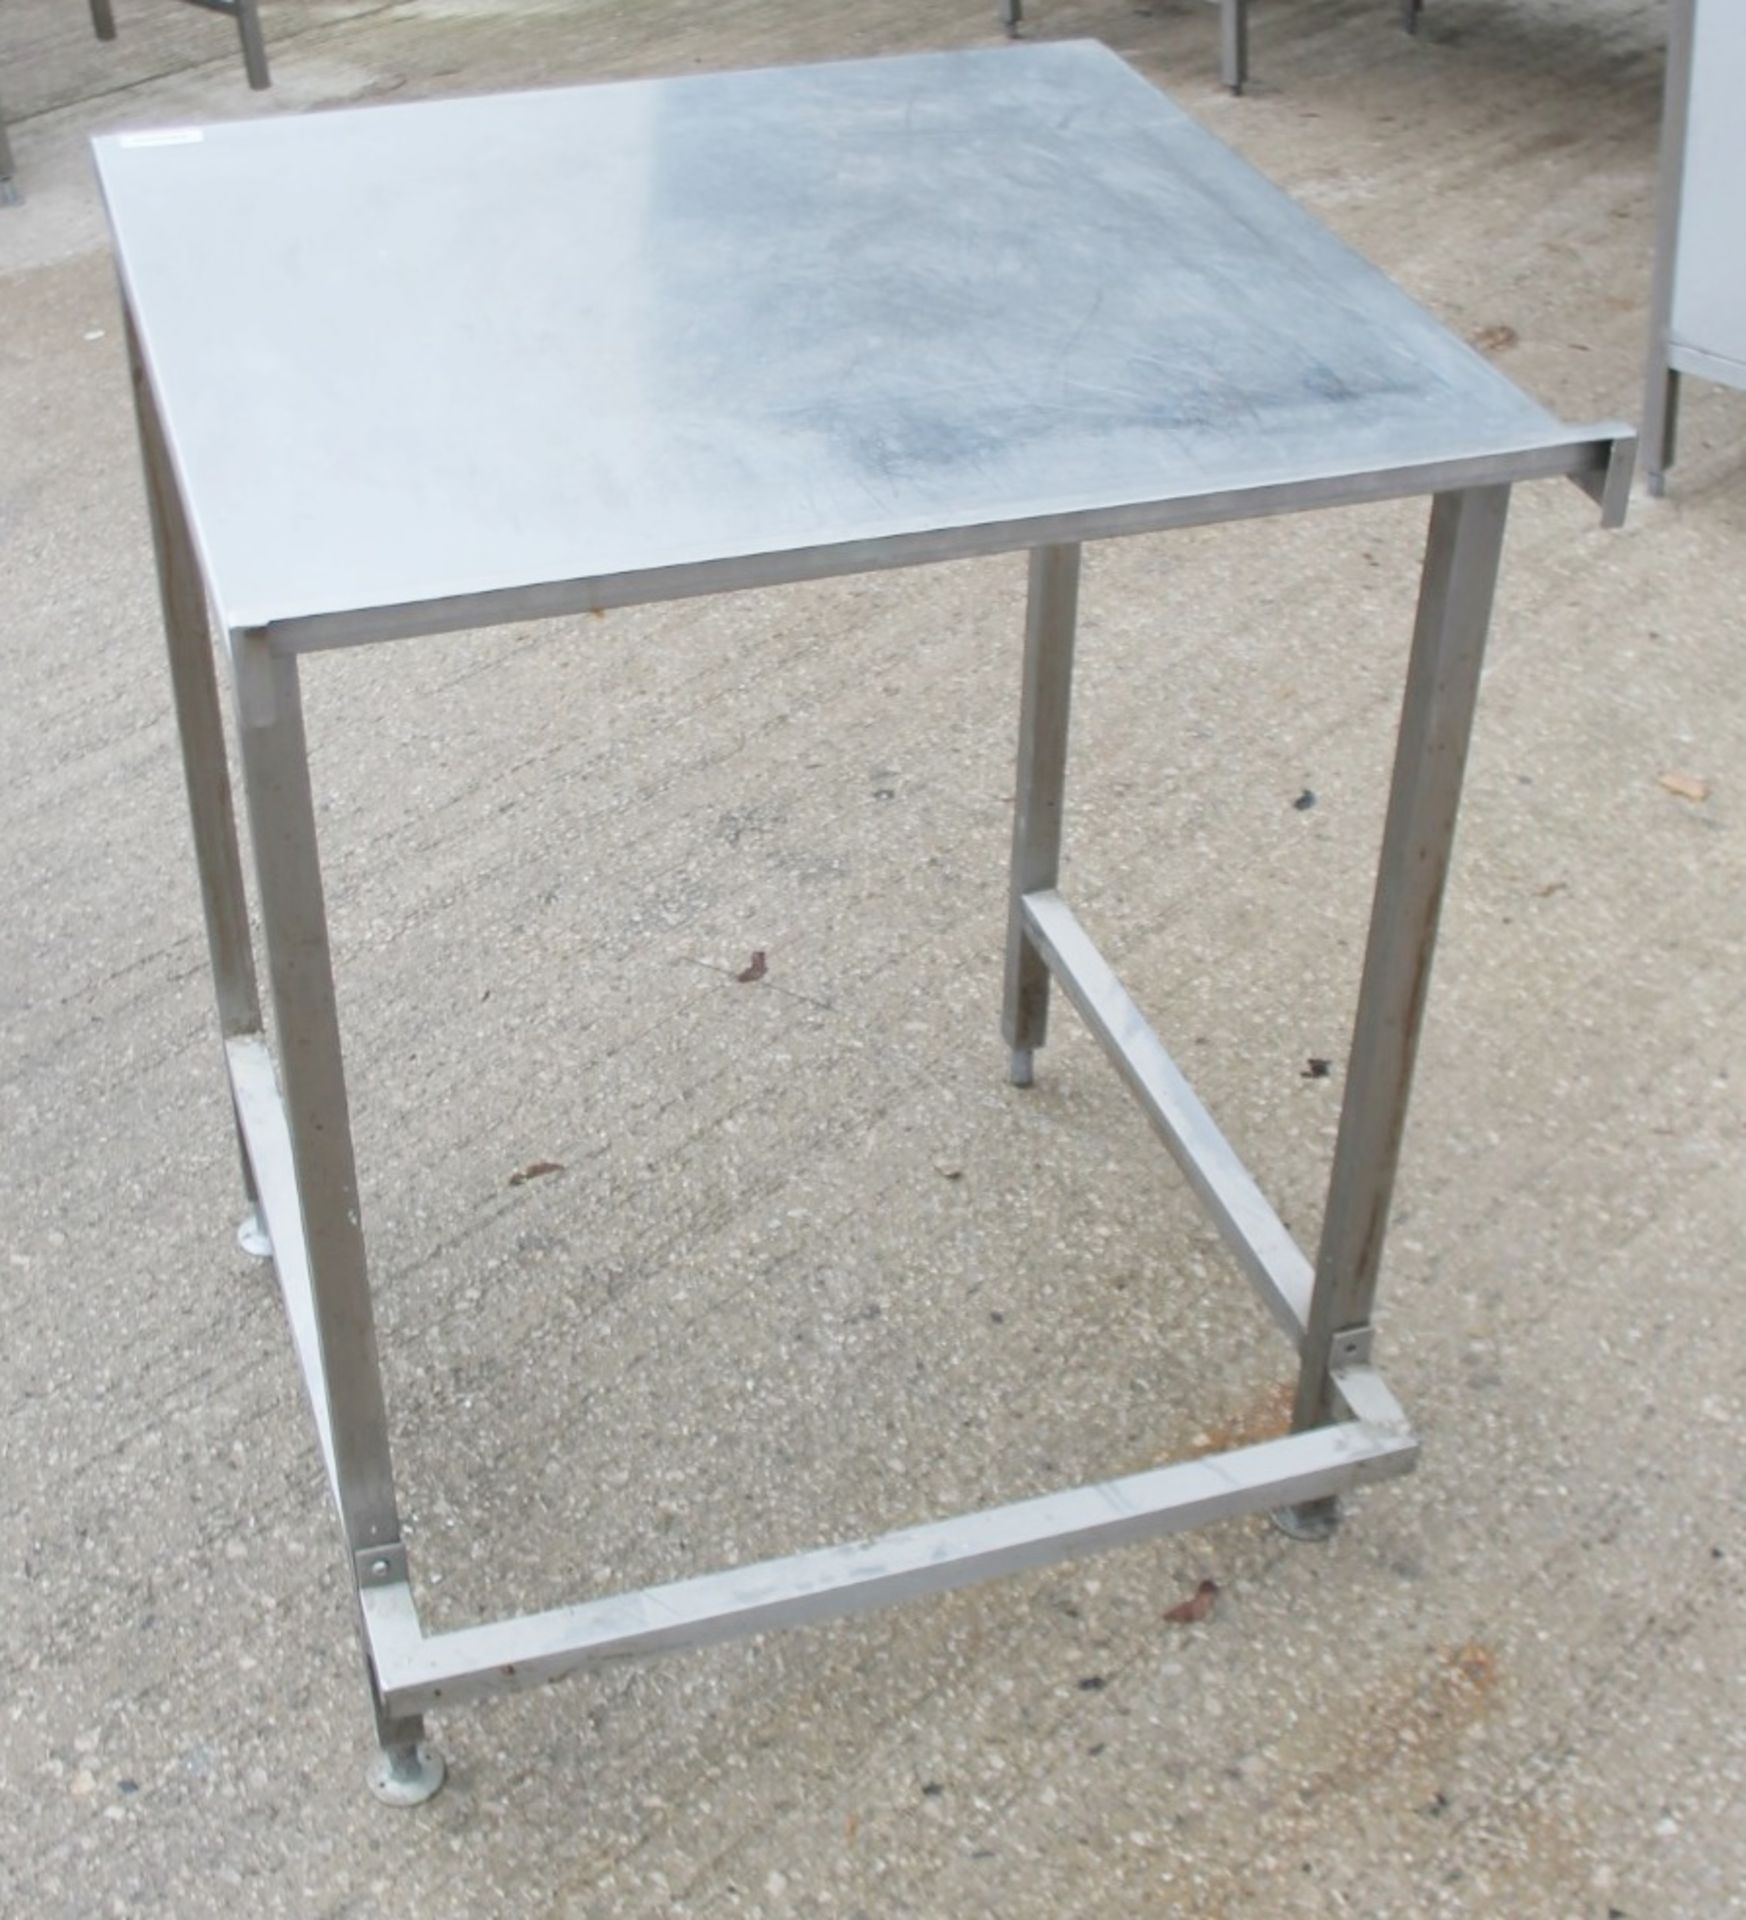 1 x Stainless Steel Commercial Square Prep Table With Upstand - Ref: GEN546 WH2 - CL802 UX - - Image 3 of 3